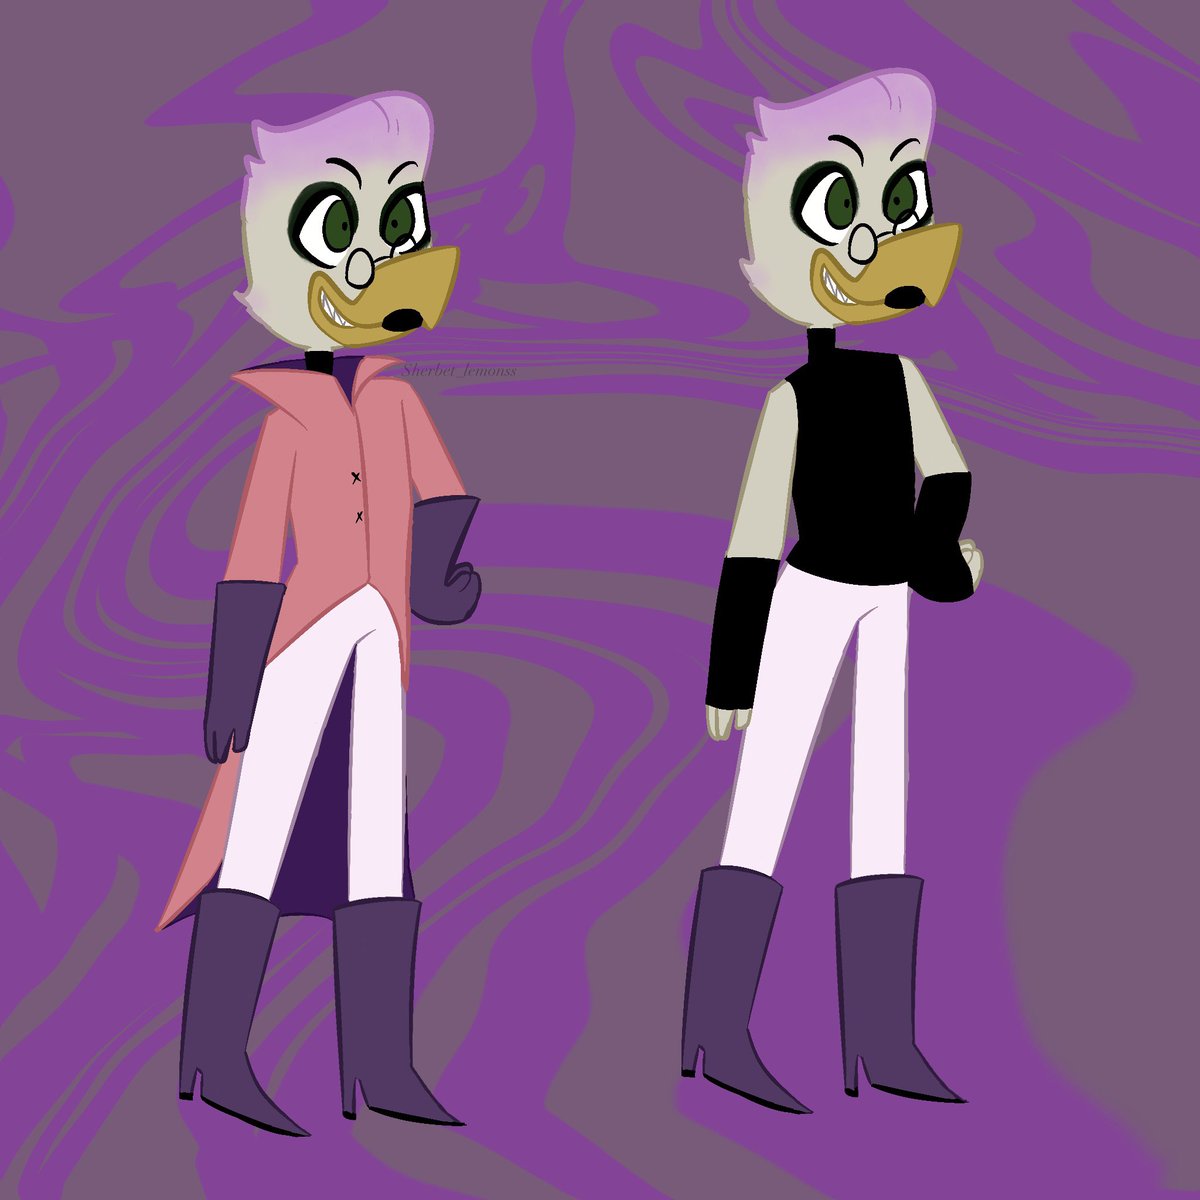 Mad ducktor evil doings fit and casual fit #ducktales #madducktor